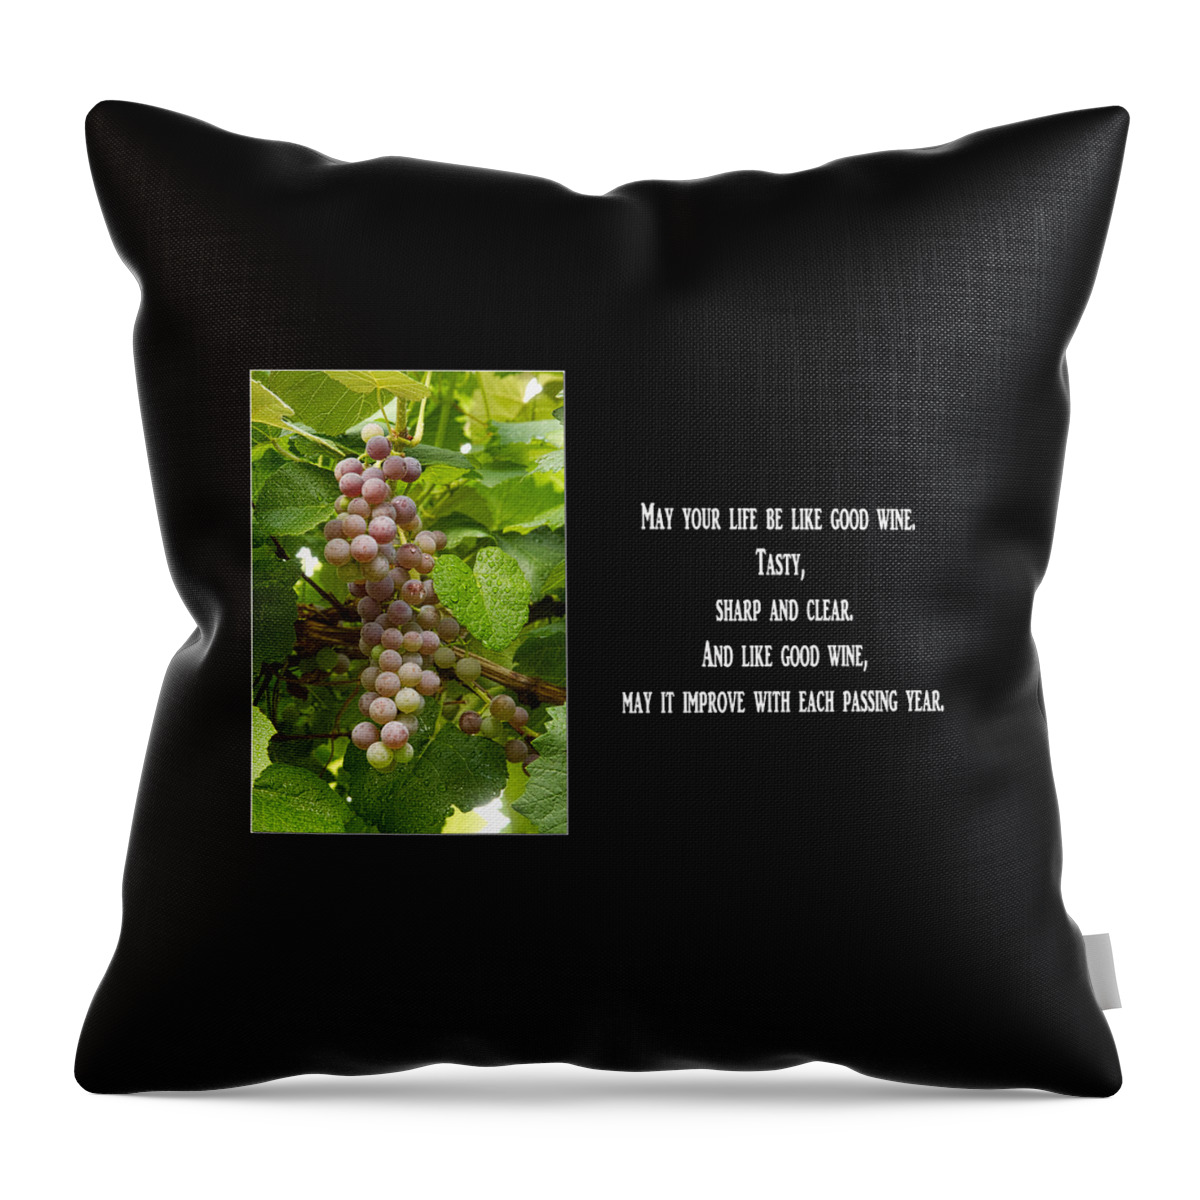 Italian Blessing Throw Pillow featuring the photograph Italian Blessing by James BO Insogna